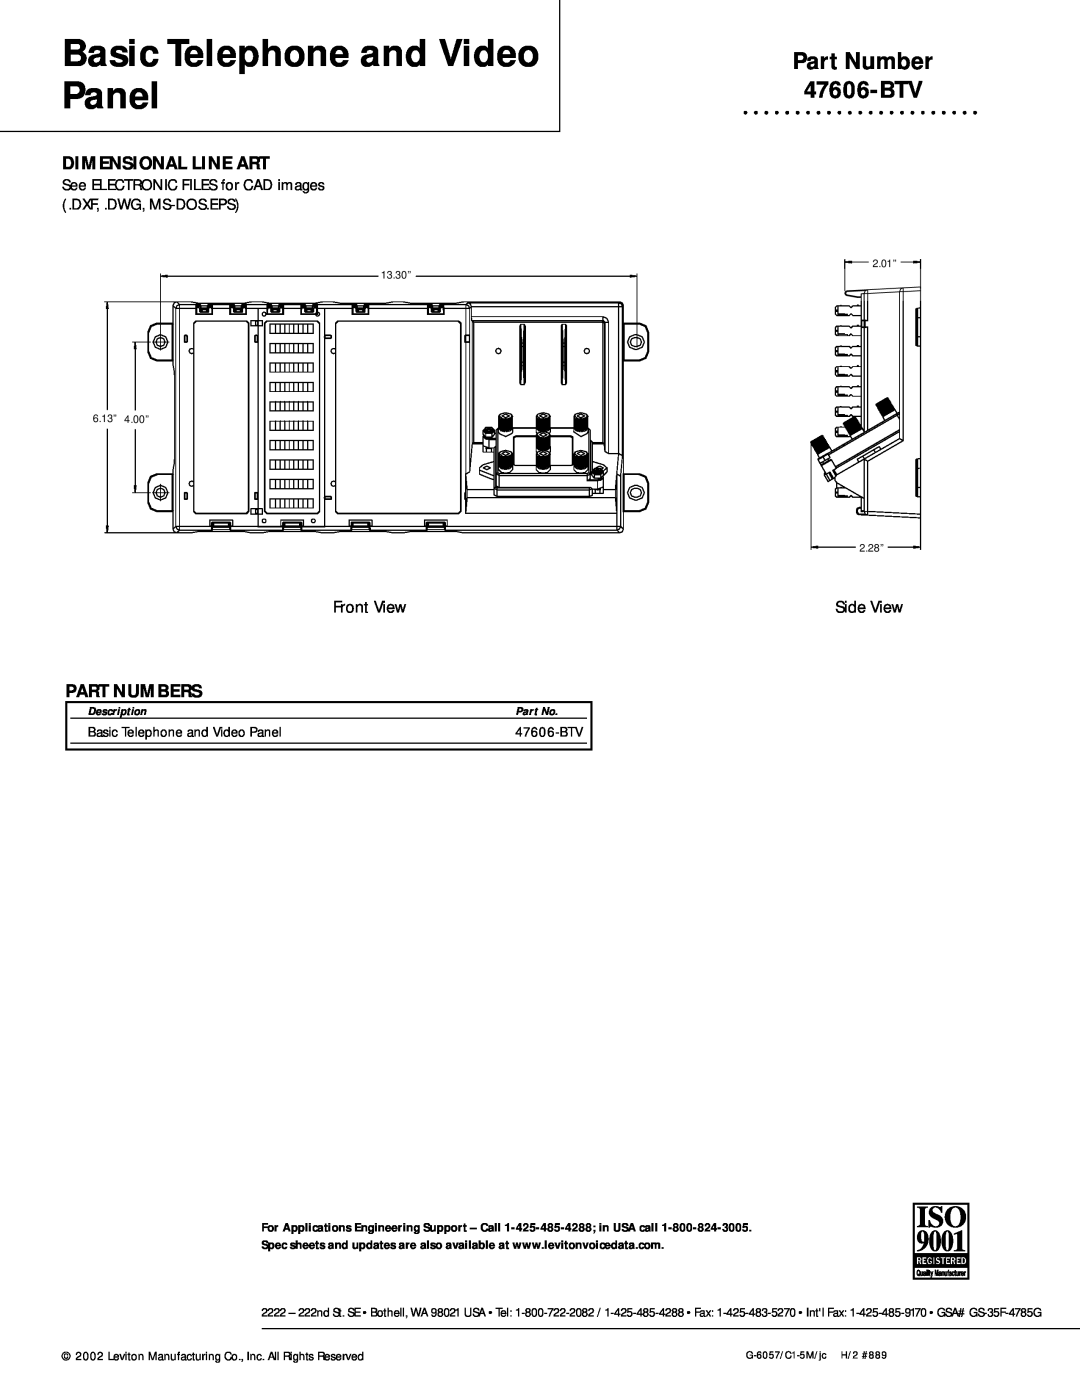 Leviton warranty Part Number 47606-BTV, Dimensional Line Art, Part Numbers, Basic Telephone and Video Panel 